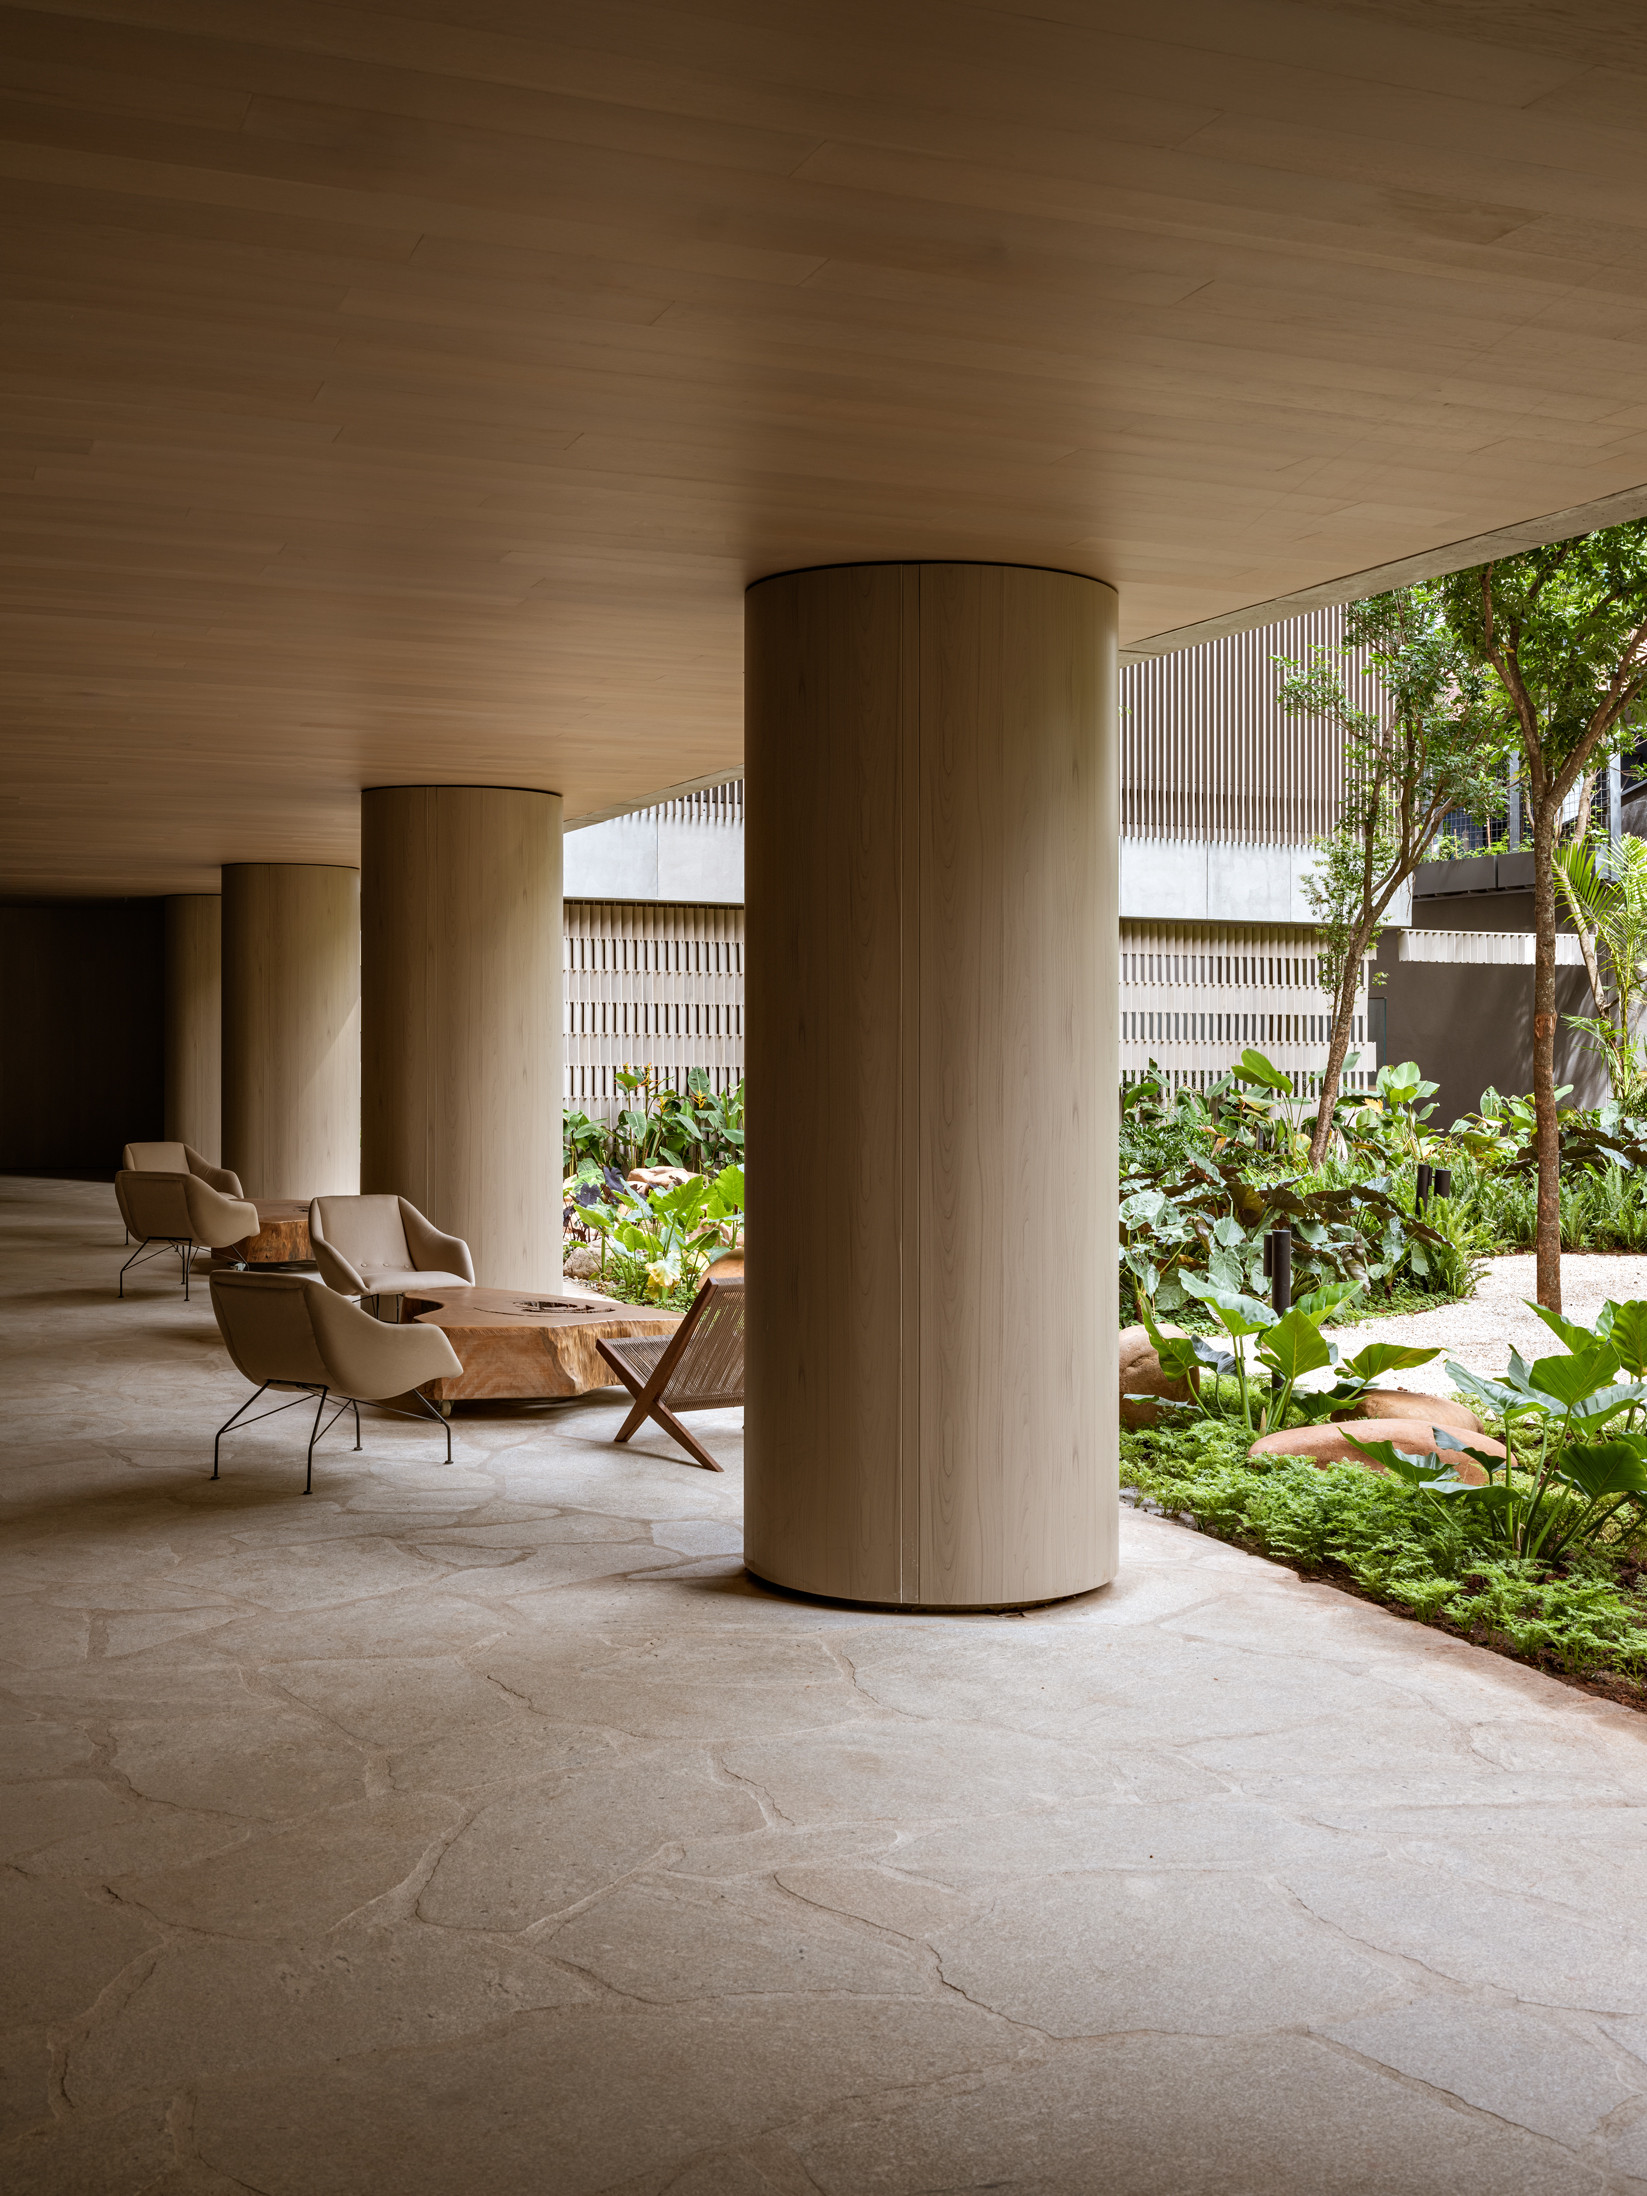 Residential Lobby - Photo of the completed building